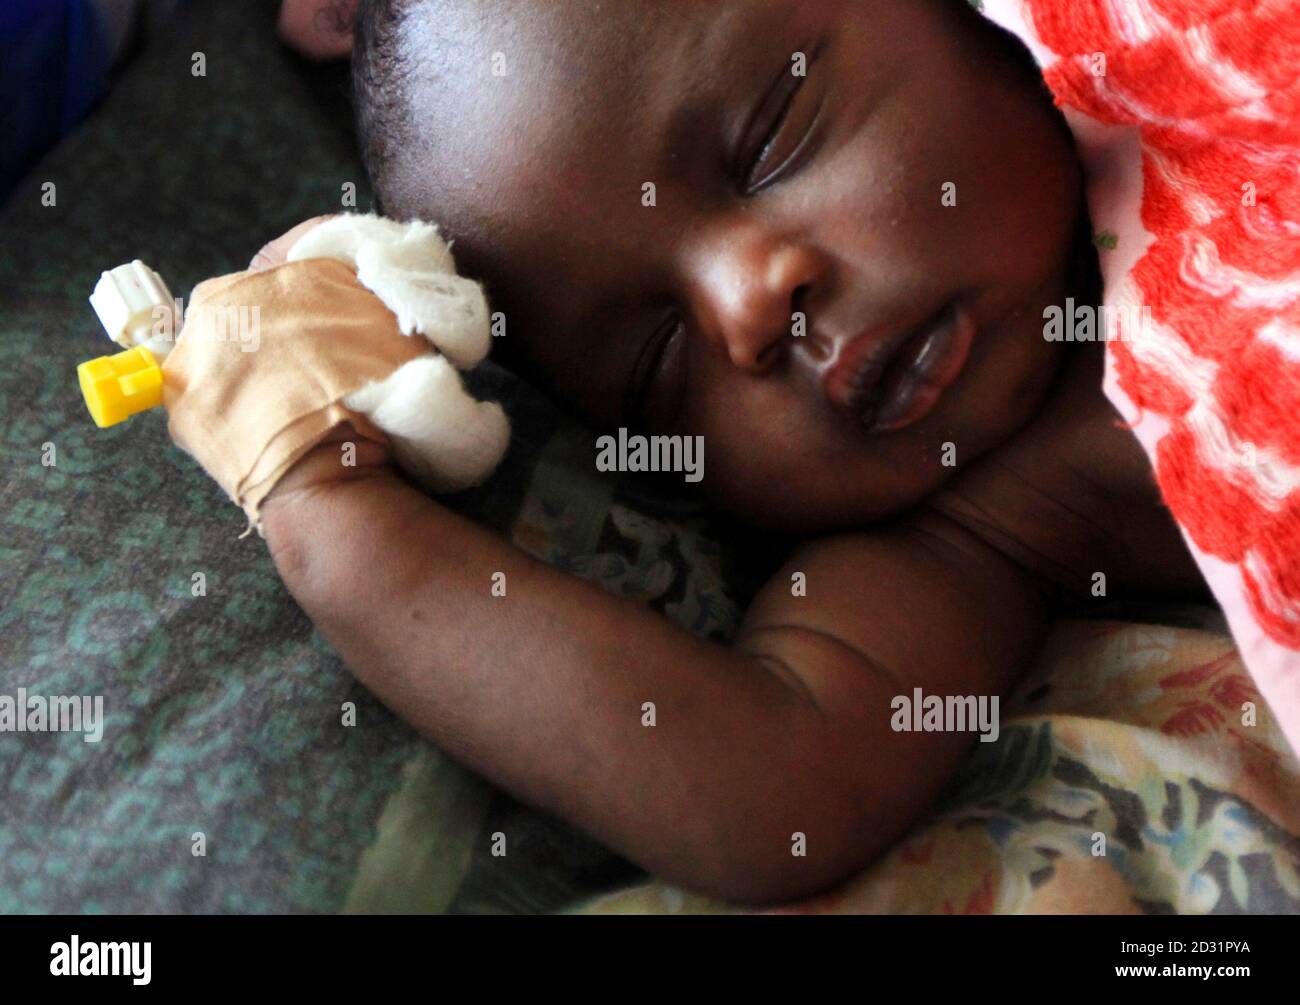 A child who is an internally displaced person (IDP), receives treatment at the Akobo hospital during a visit by Norway's Foreign Minister Jonas Gahr Stoere in Akobo, June 2, 2010. REUTERS/Mohamed Nureldin Abdallah (SUDAN - Tags: CIVIL UNREST HEALTH SOCIETY POLITICS) Stock Photo